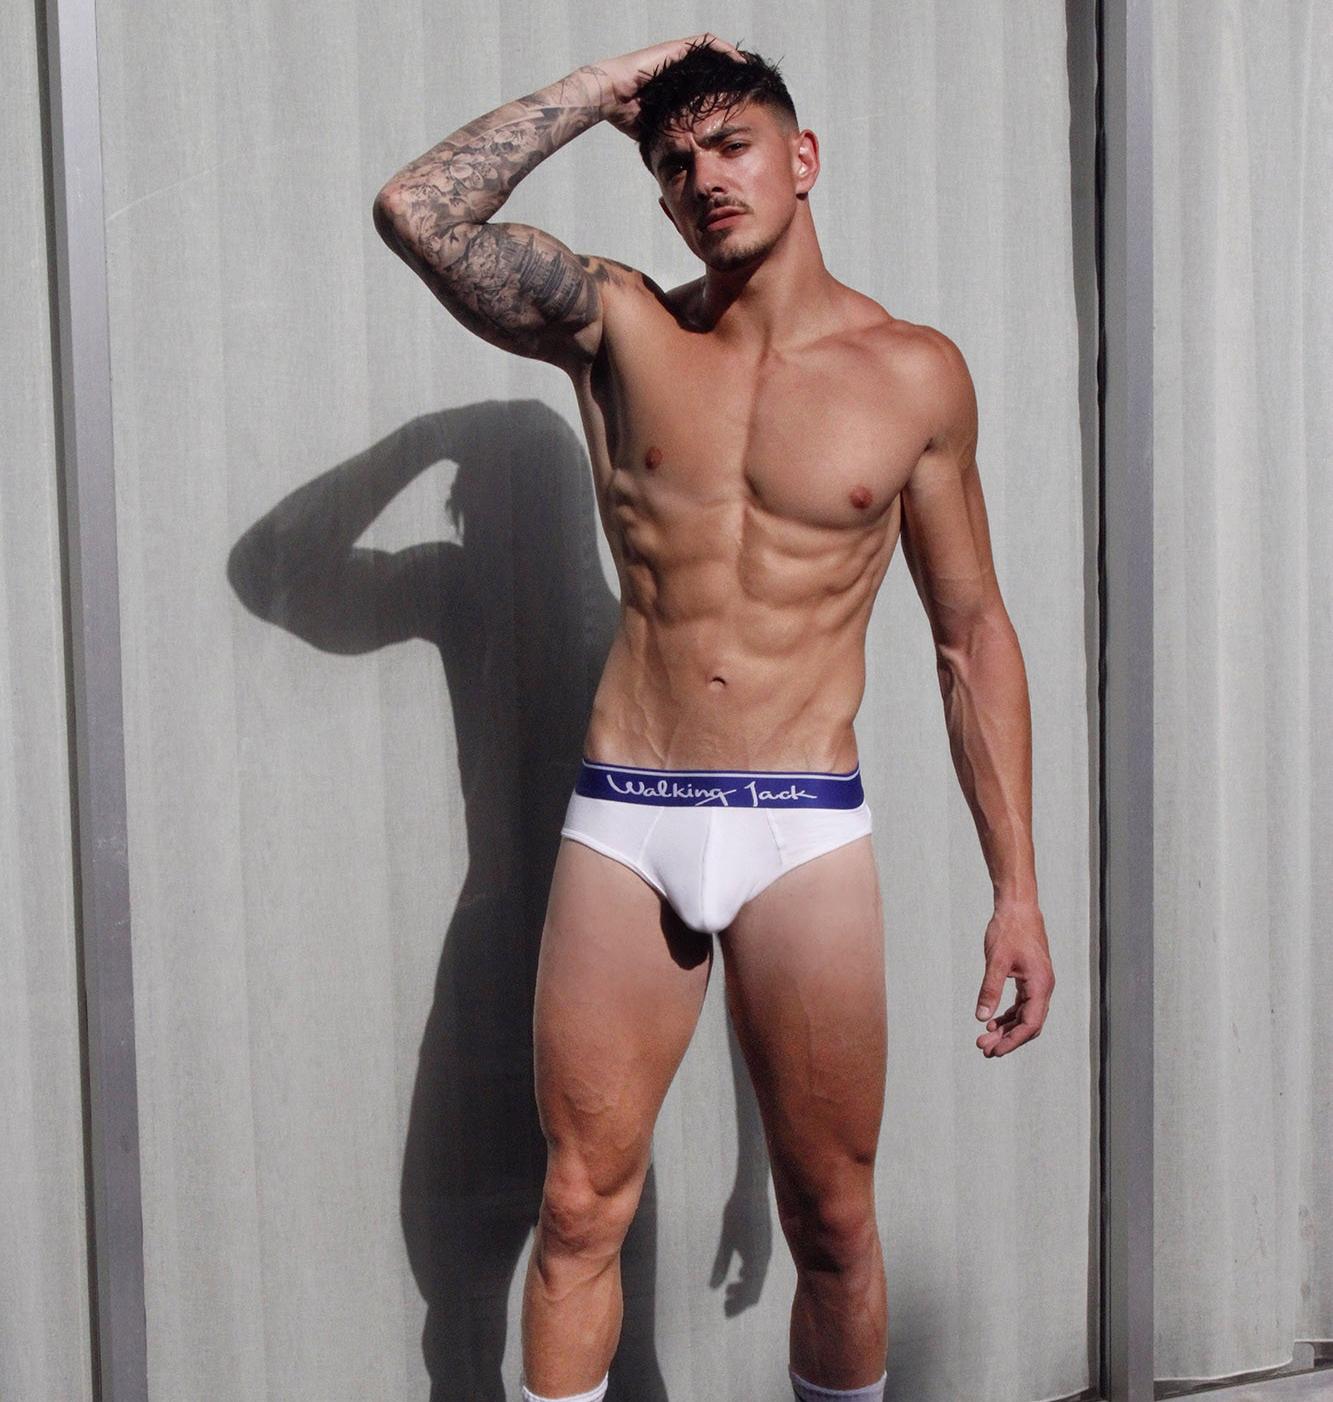 Tamir Mardo Is A Serious Man With A Hot Package | Daily Dudes @ Dude Dump